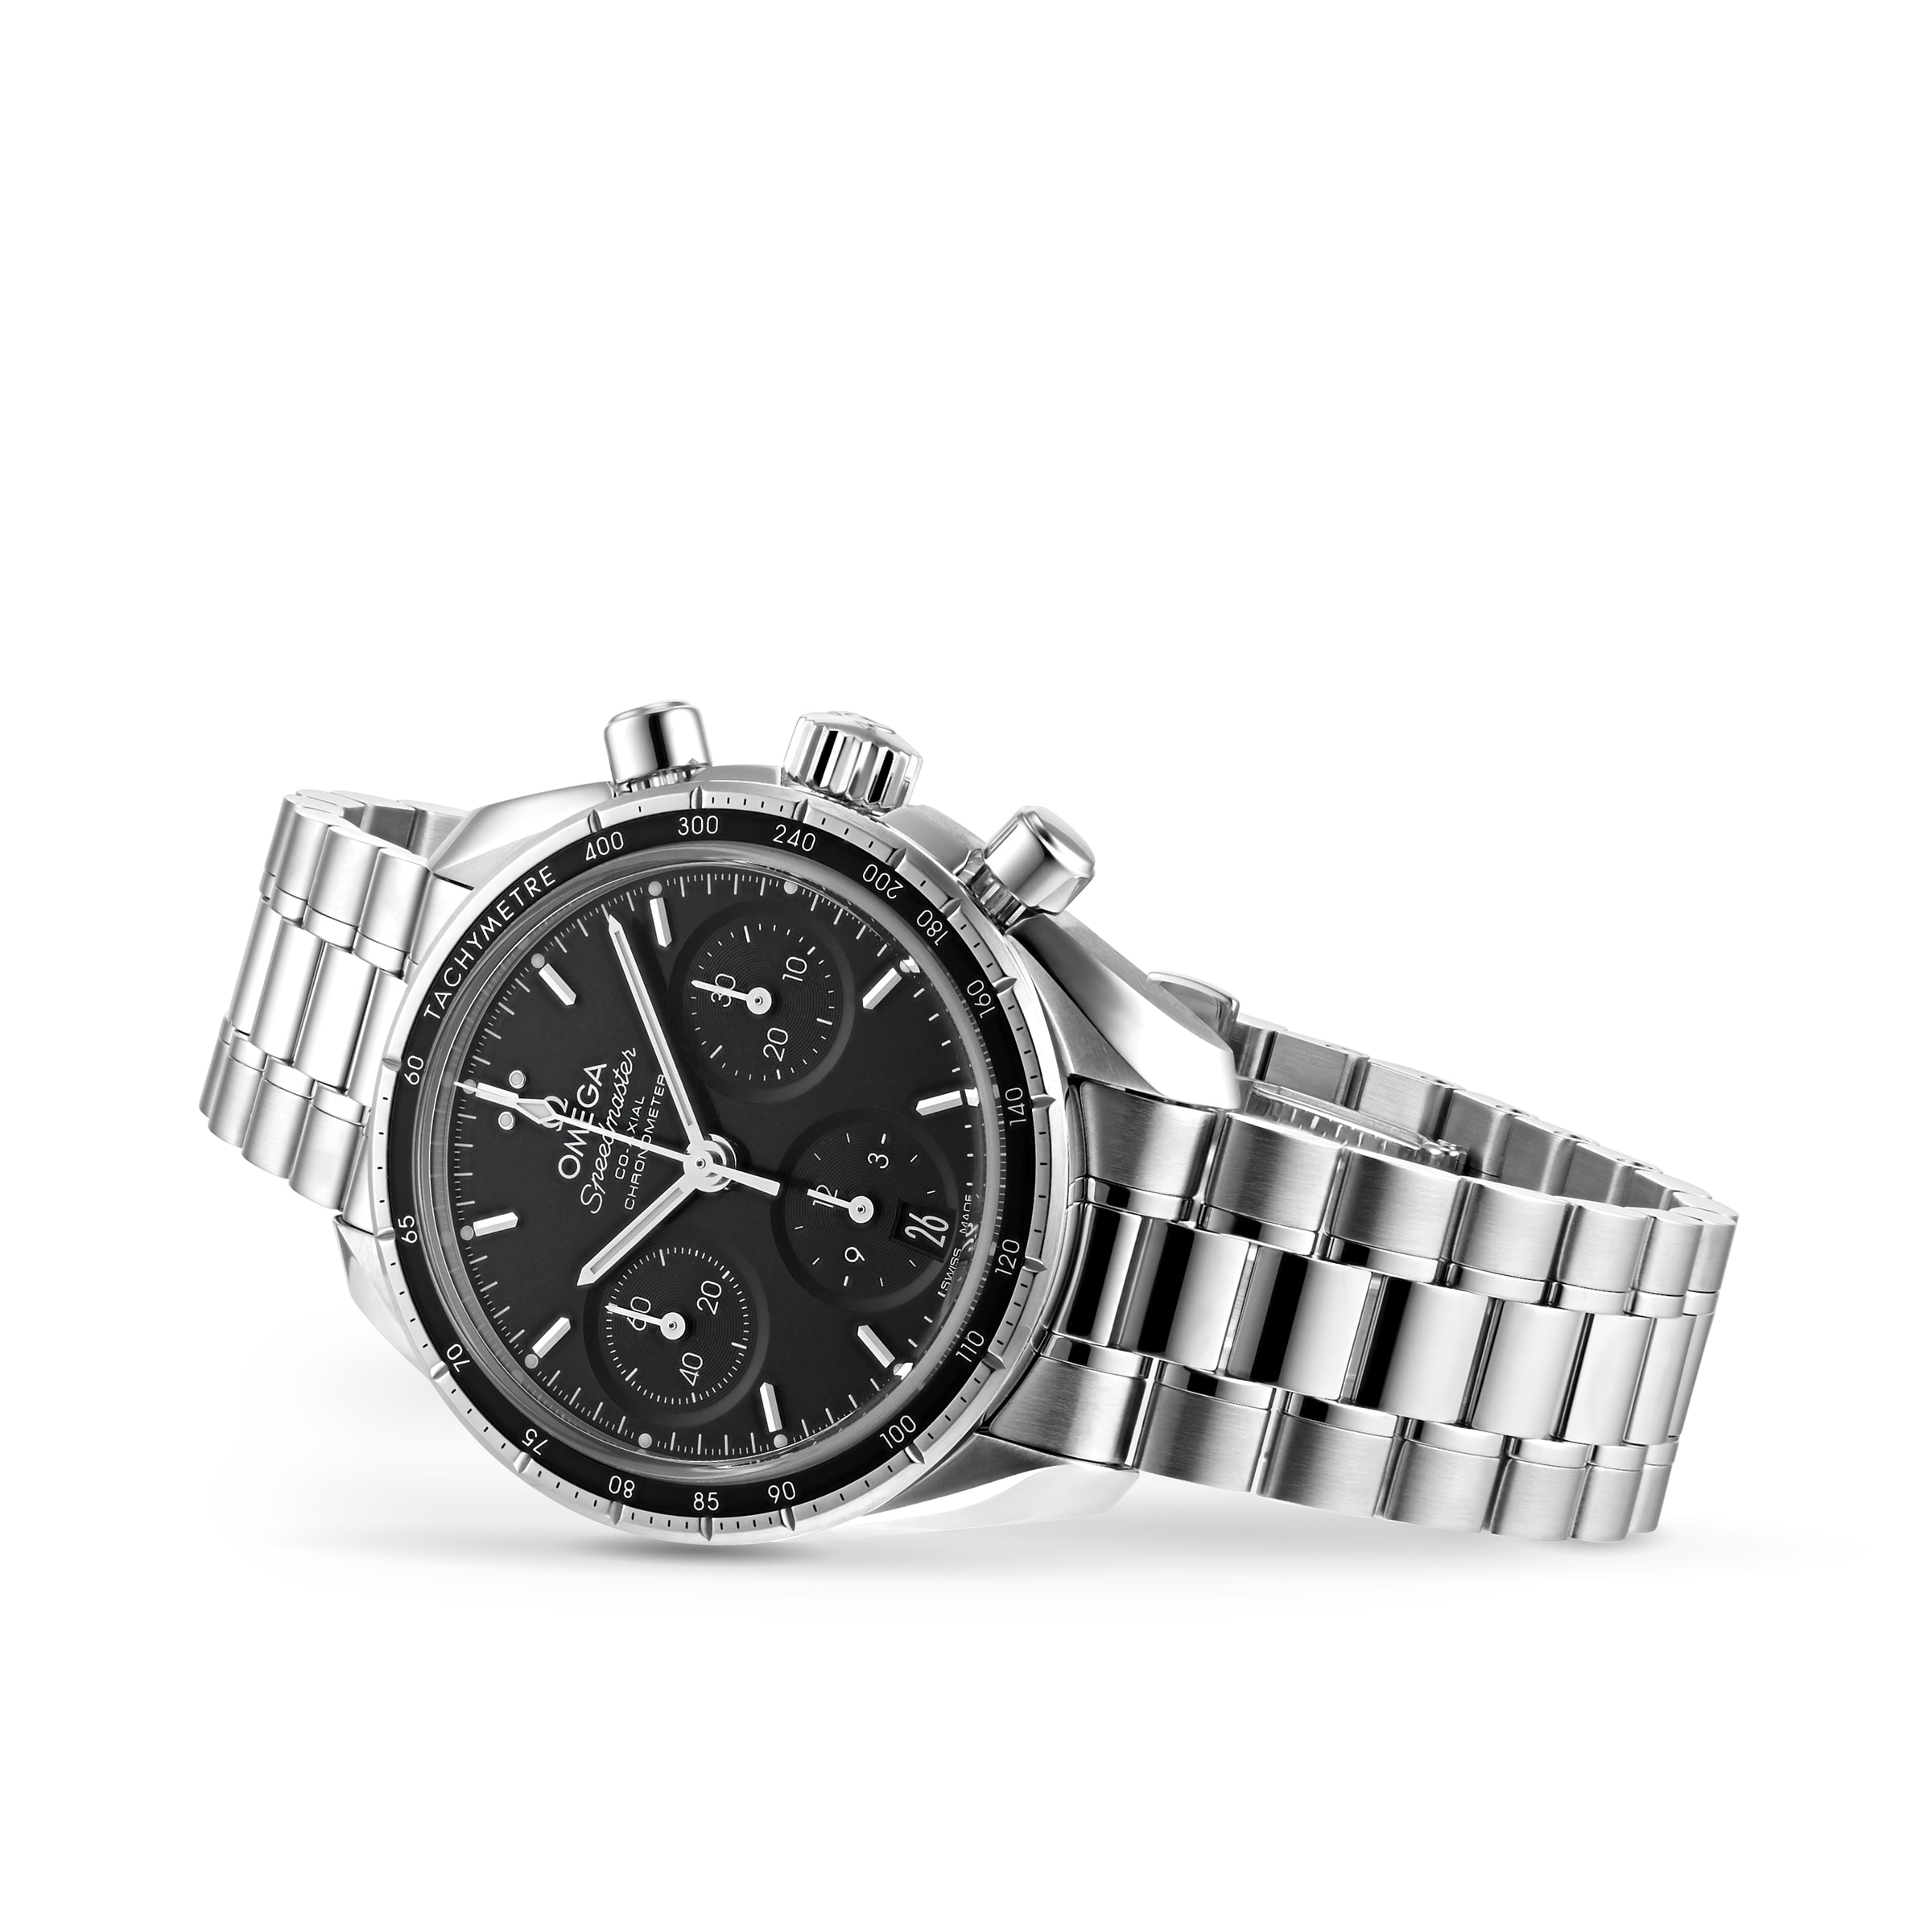 Speedmaster 38 Co-Axial Chronograph Automatic Watch